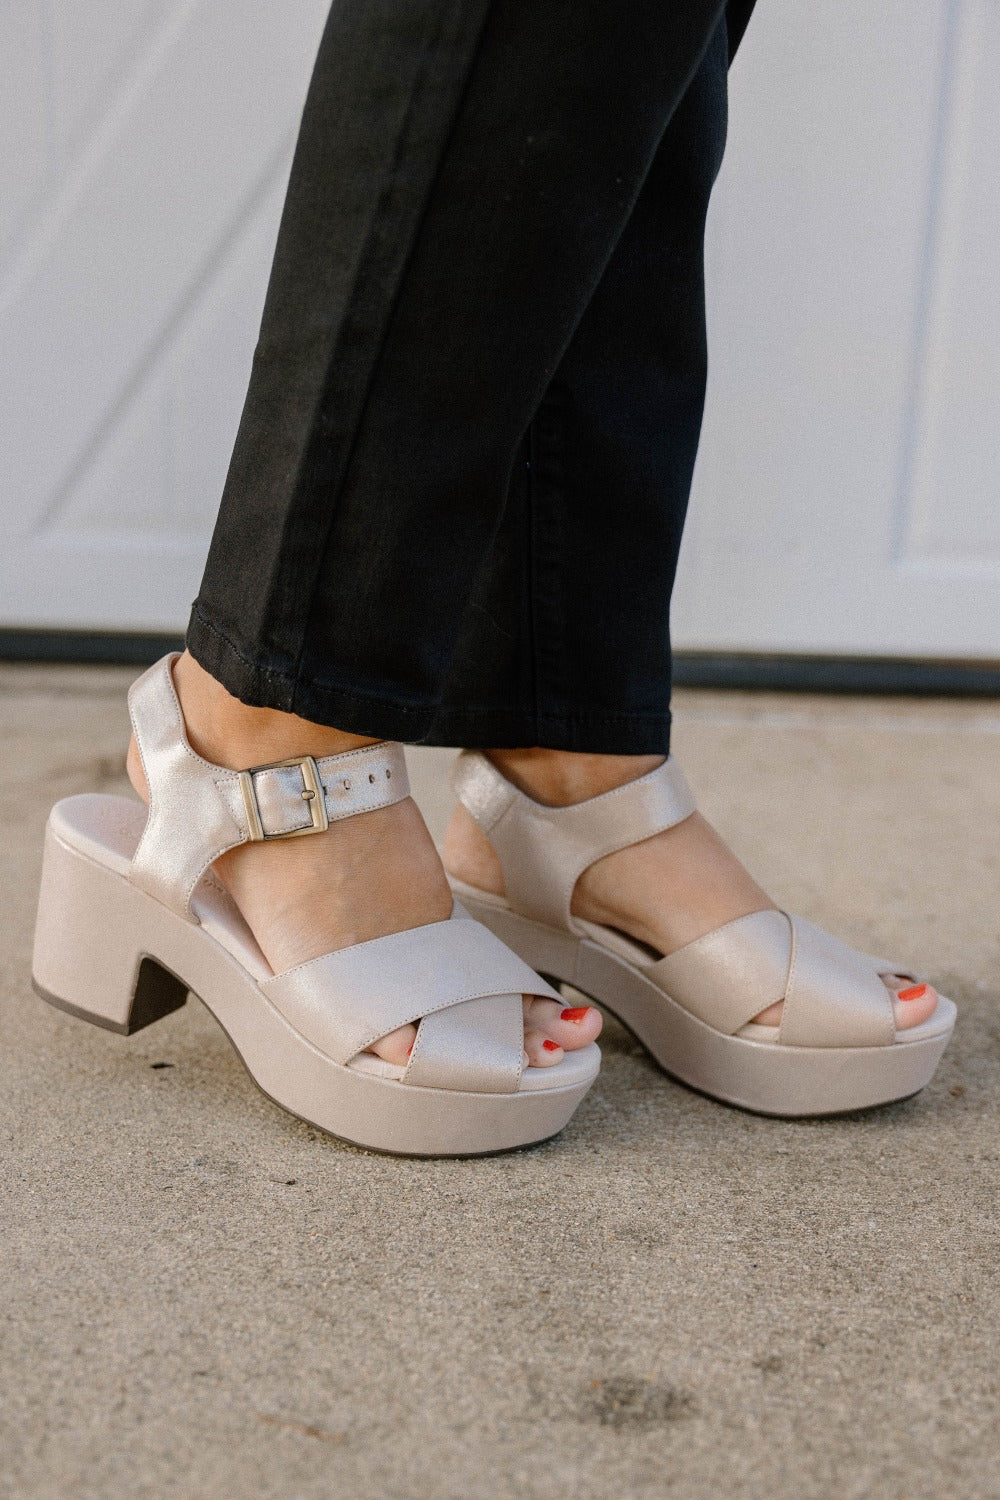 Ginny Chunky Heel Sandal in Champagne Leather by Chocolat Blu